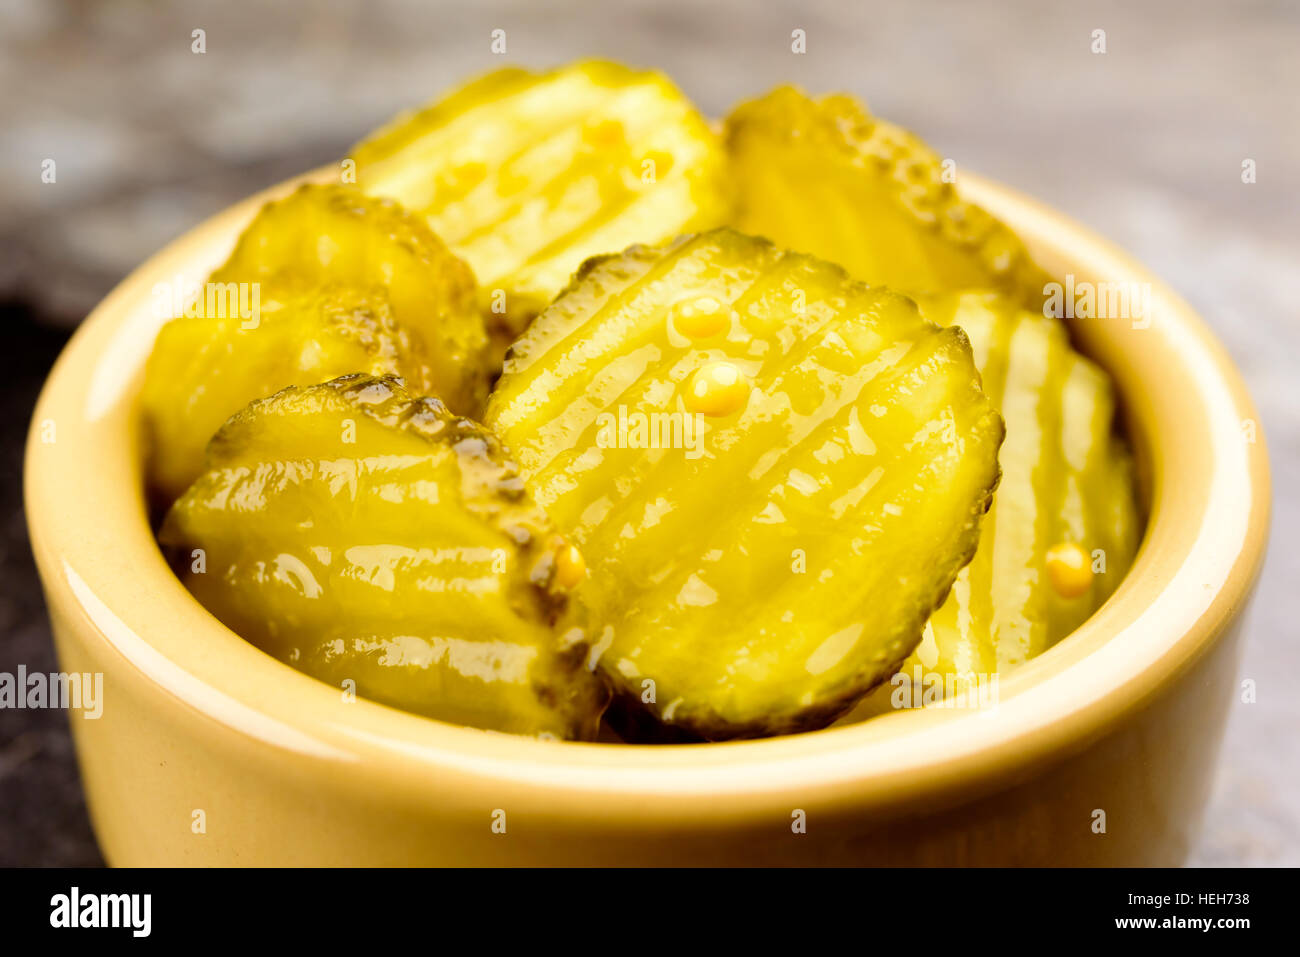 Fresh homemade pickled cucumber with mustard seeds in small ceramic bowl Stock Photo